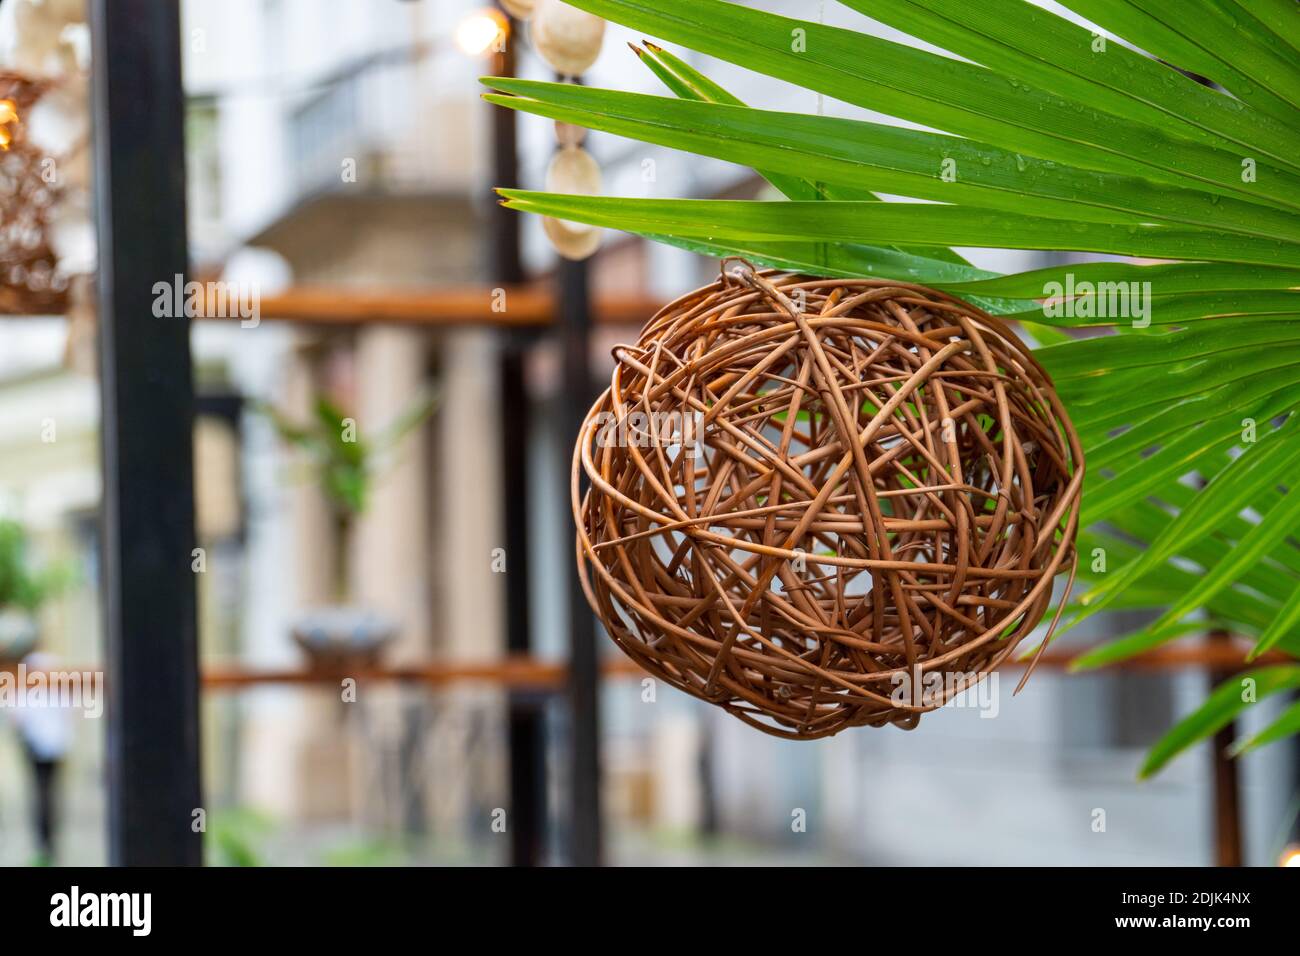 Wicker basket hanging from a palm tree. Stock Photo